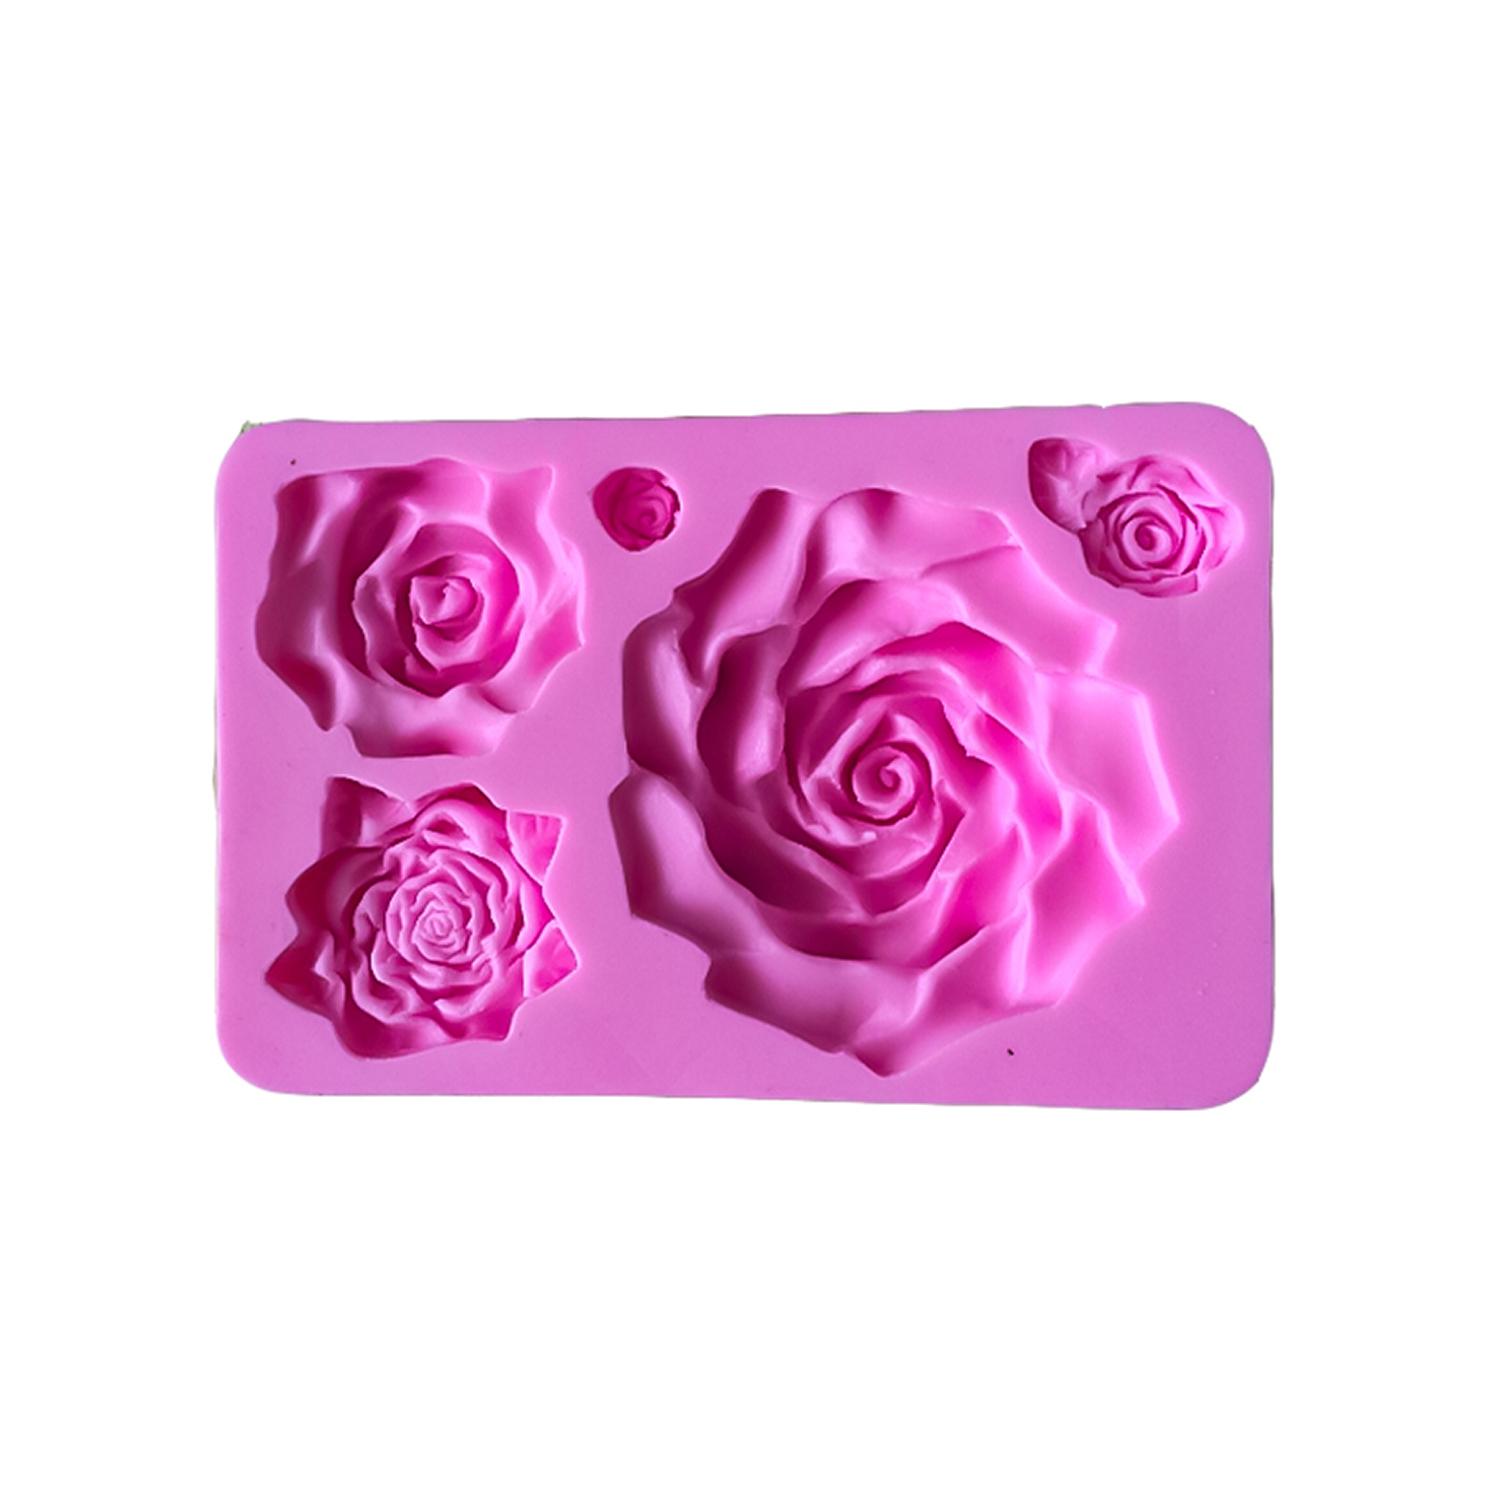 SFGM0018 5 CAVITY ROSE SILICON MOULD